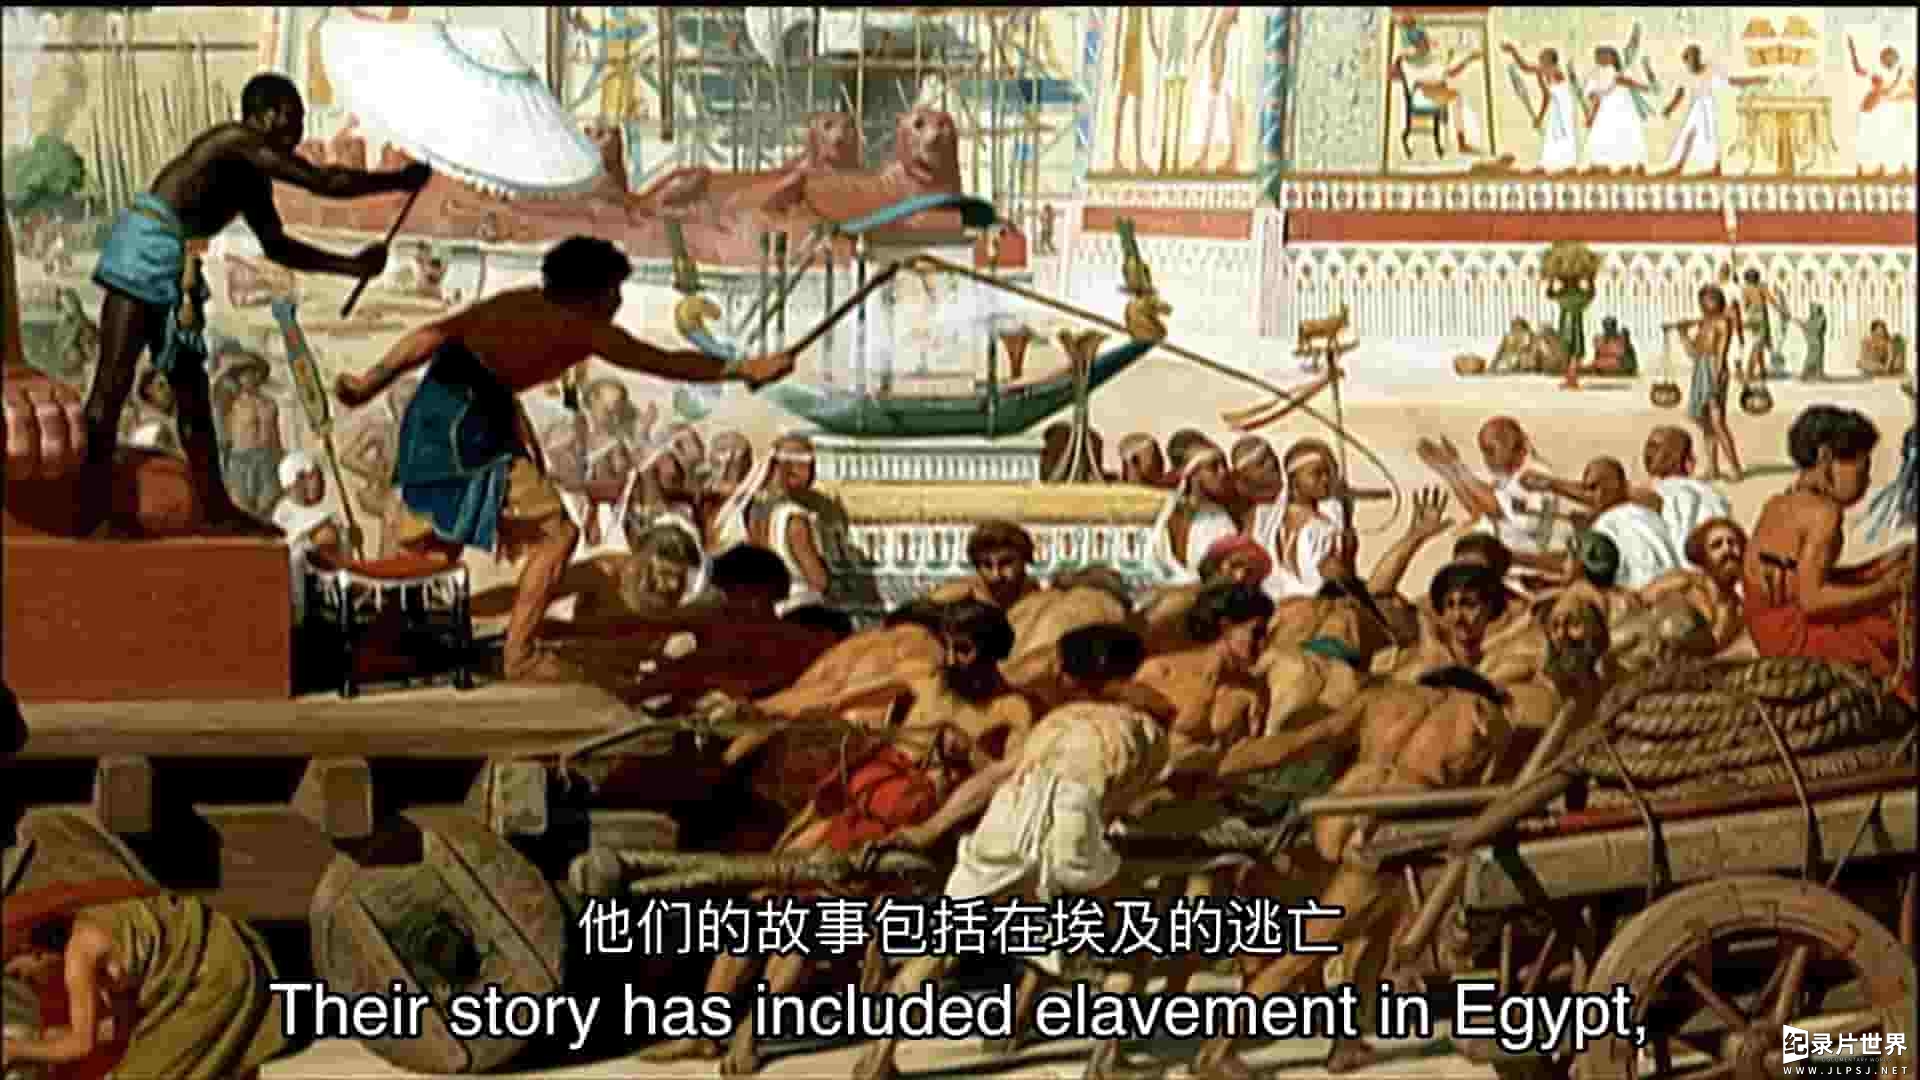 PBS纪录片《犹太人：生存的故事 The Jewish People: A Story of Survival 2008》全1集